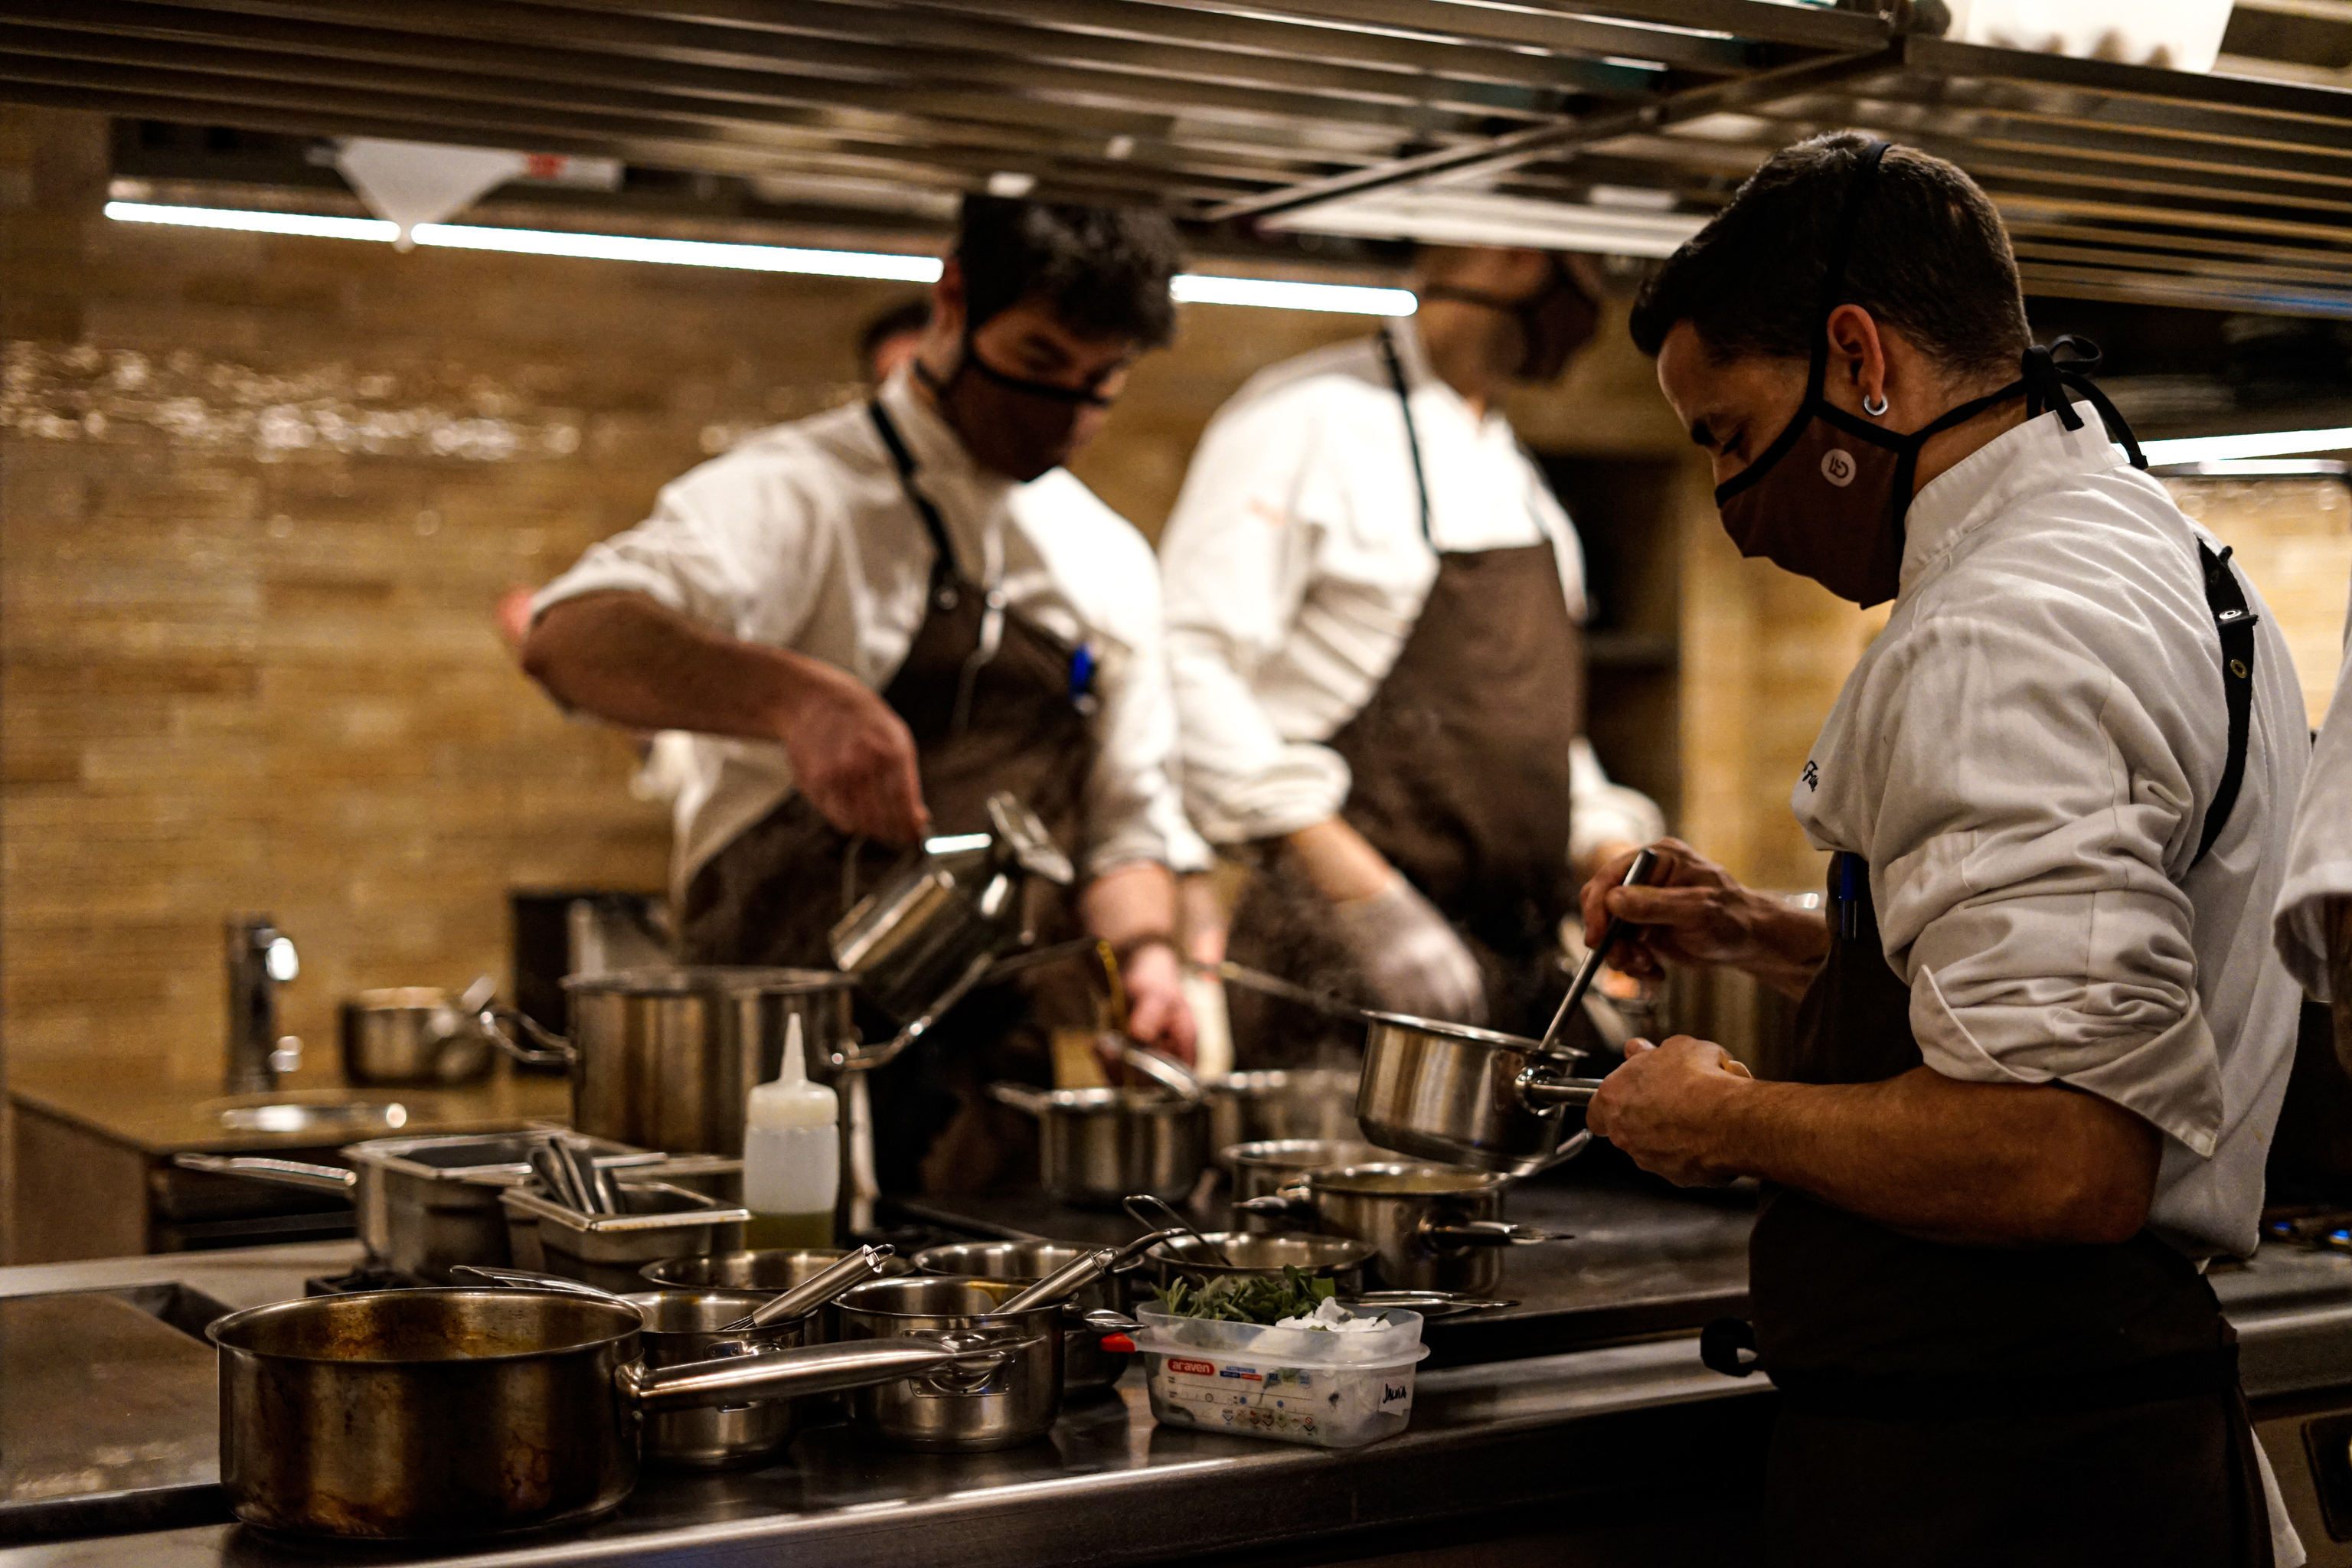 The kitchen, where you can see the team working, is the backbone of the space.